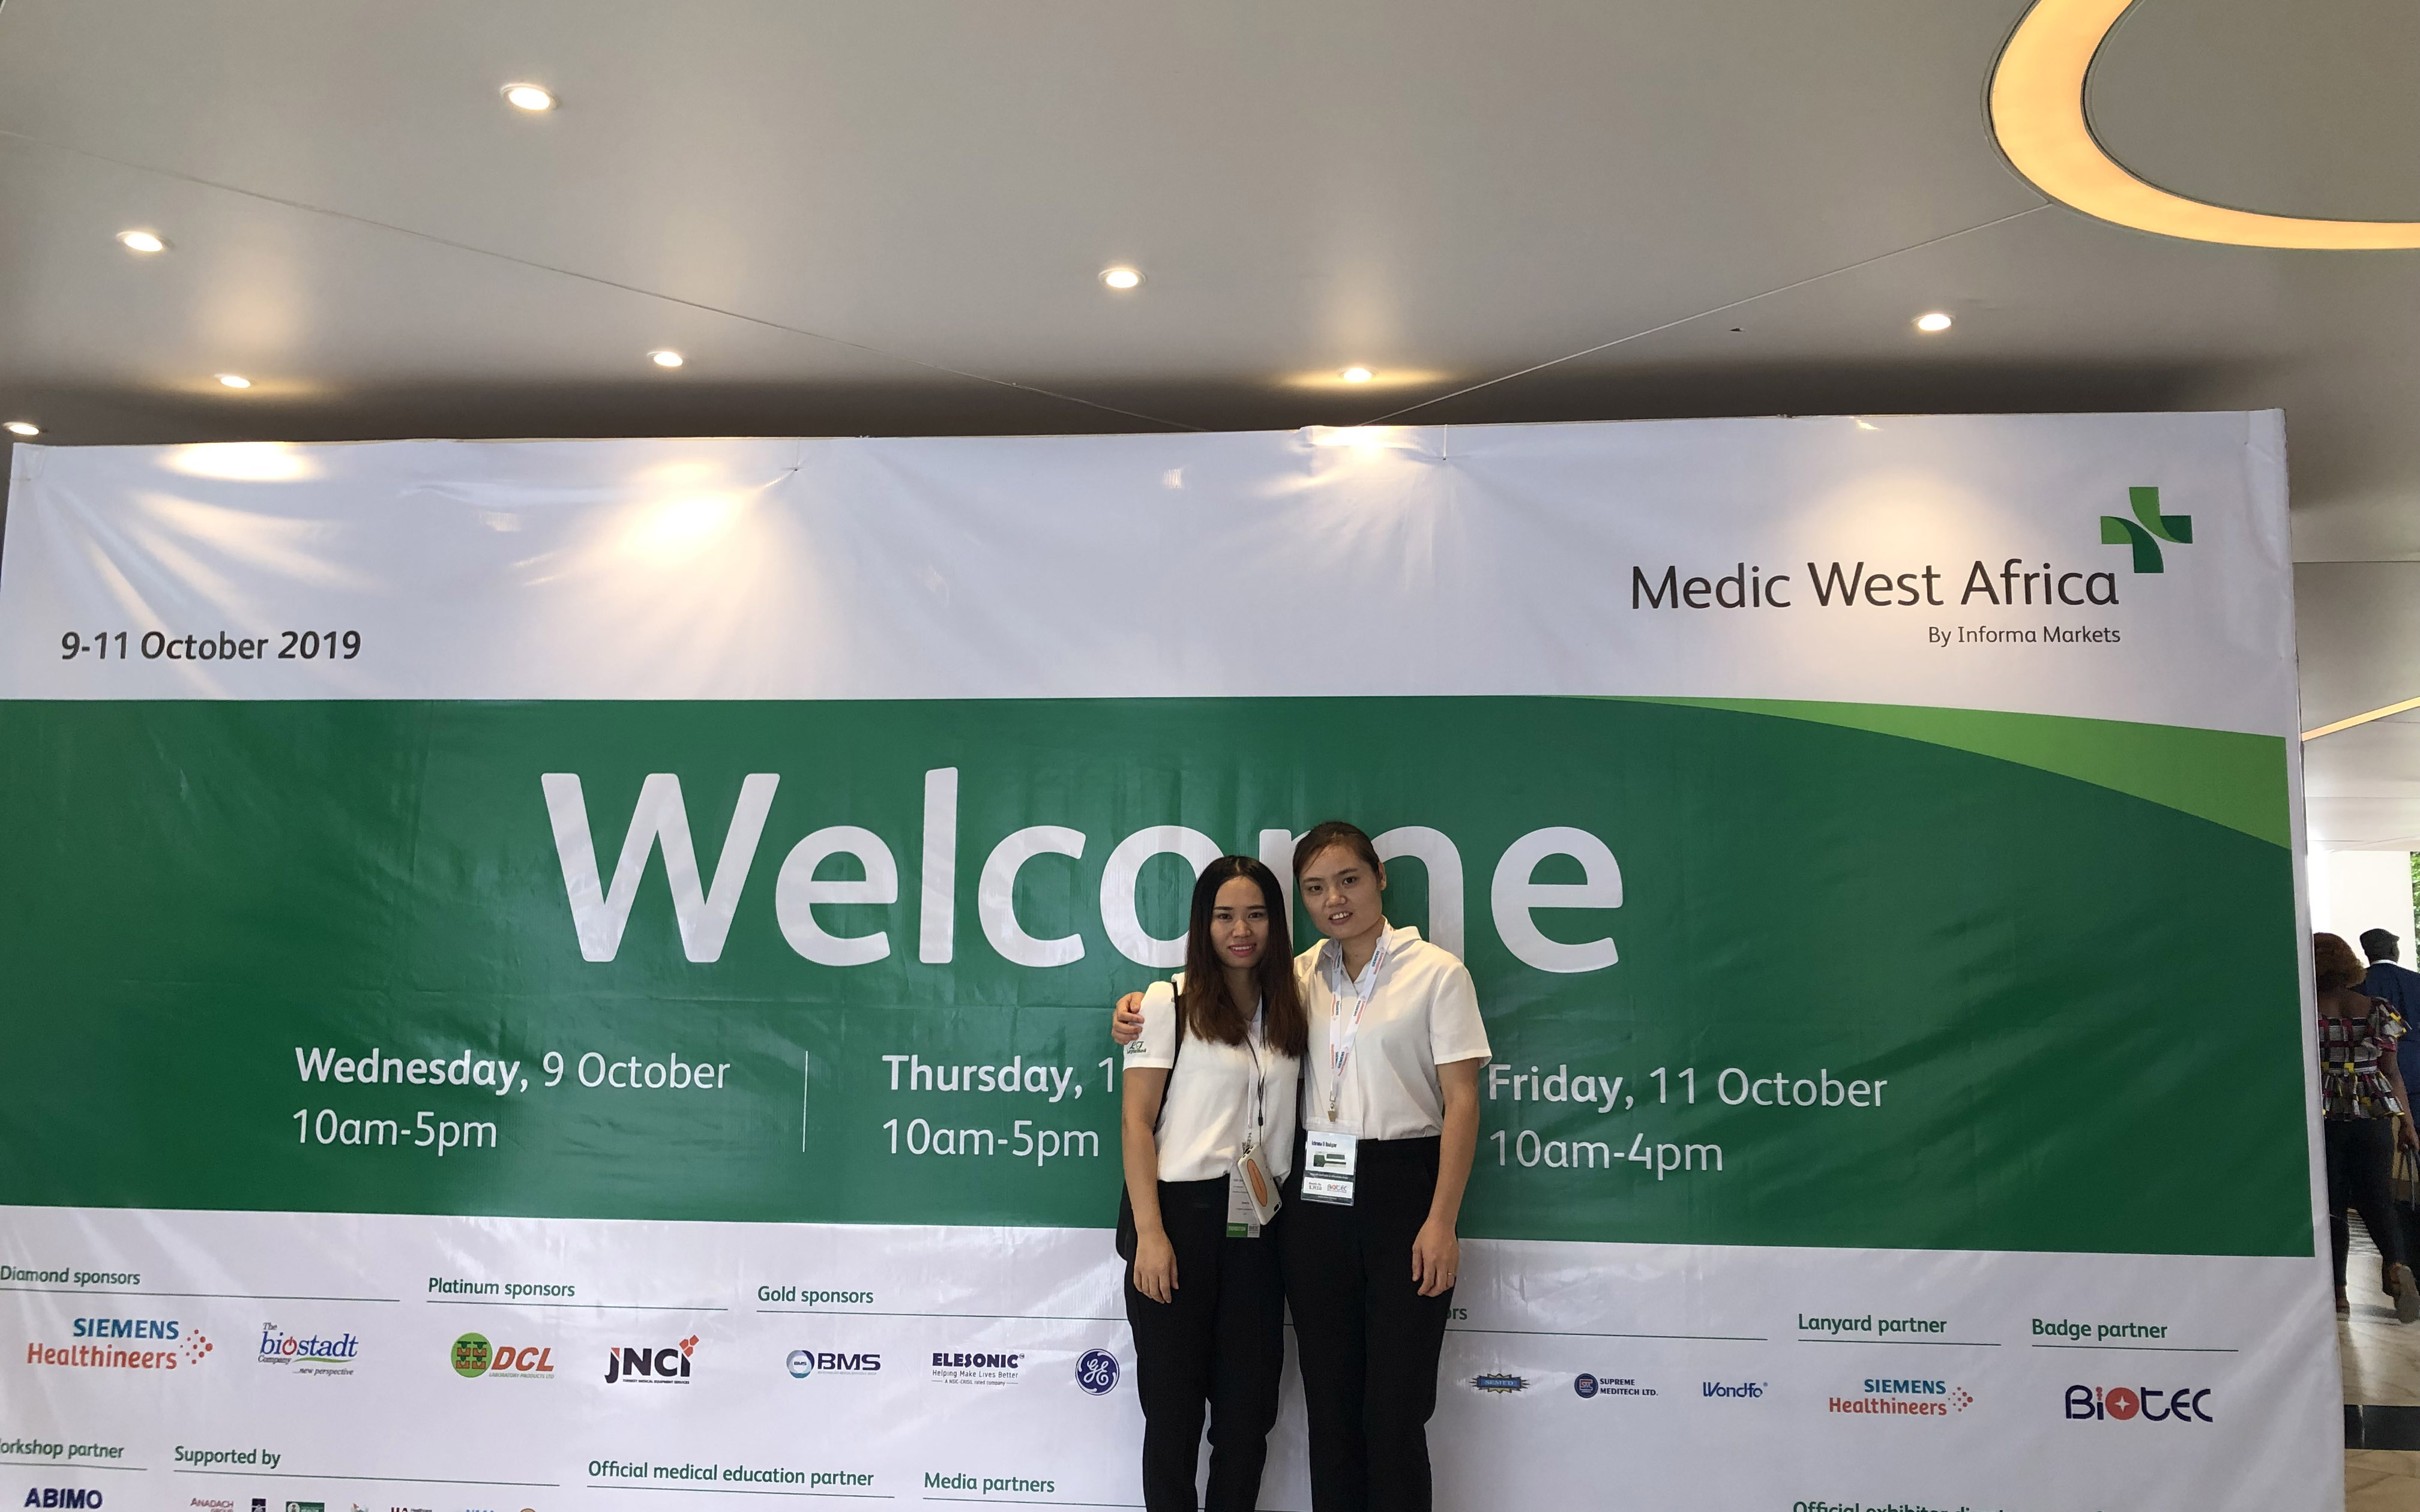 The first day Medic West Africa  Exhibition